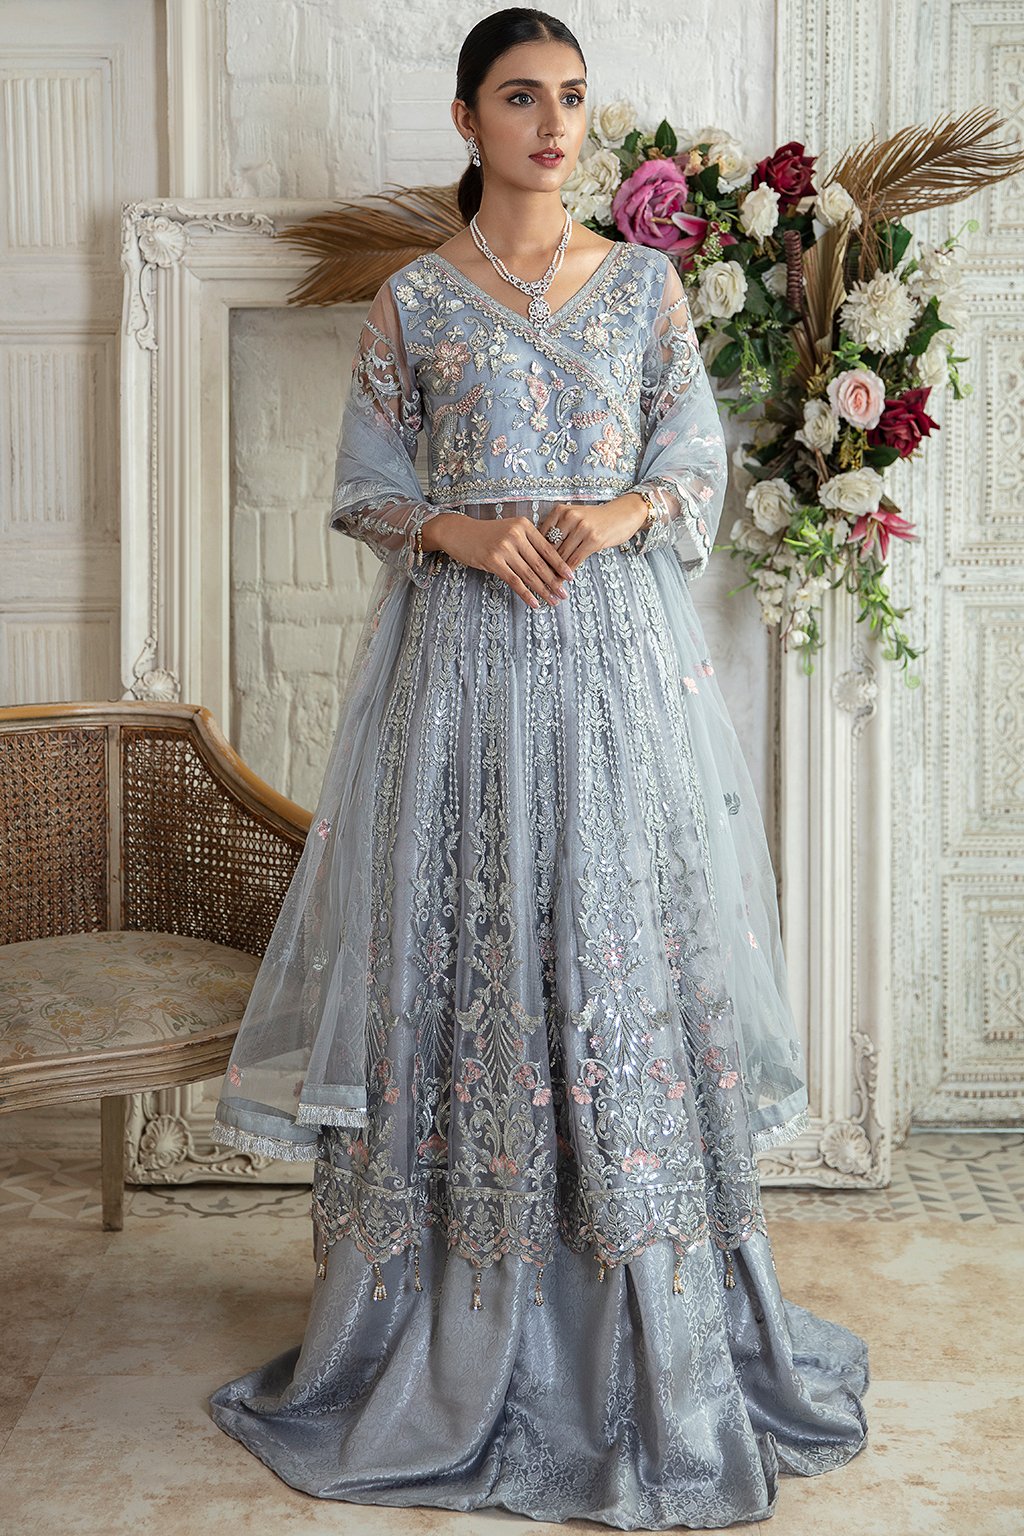 Emaan Adeel Embroidered Chiffon Dress Unstitched 3piece - LE 01